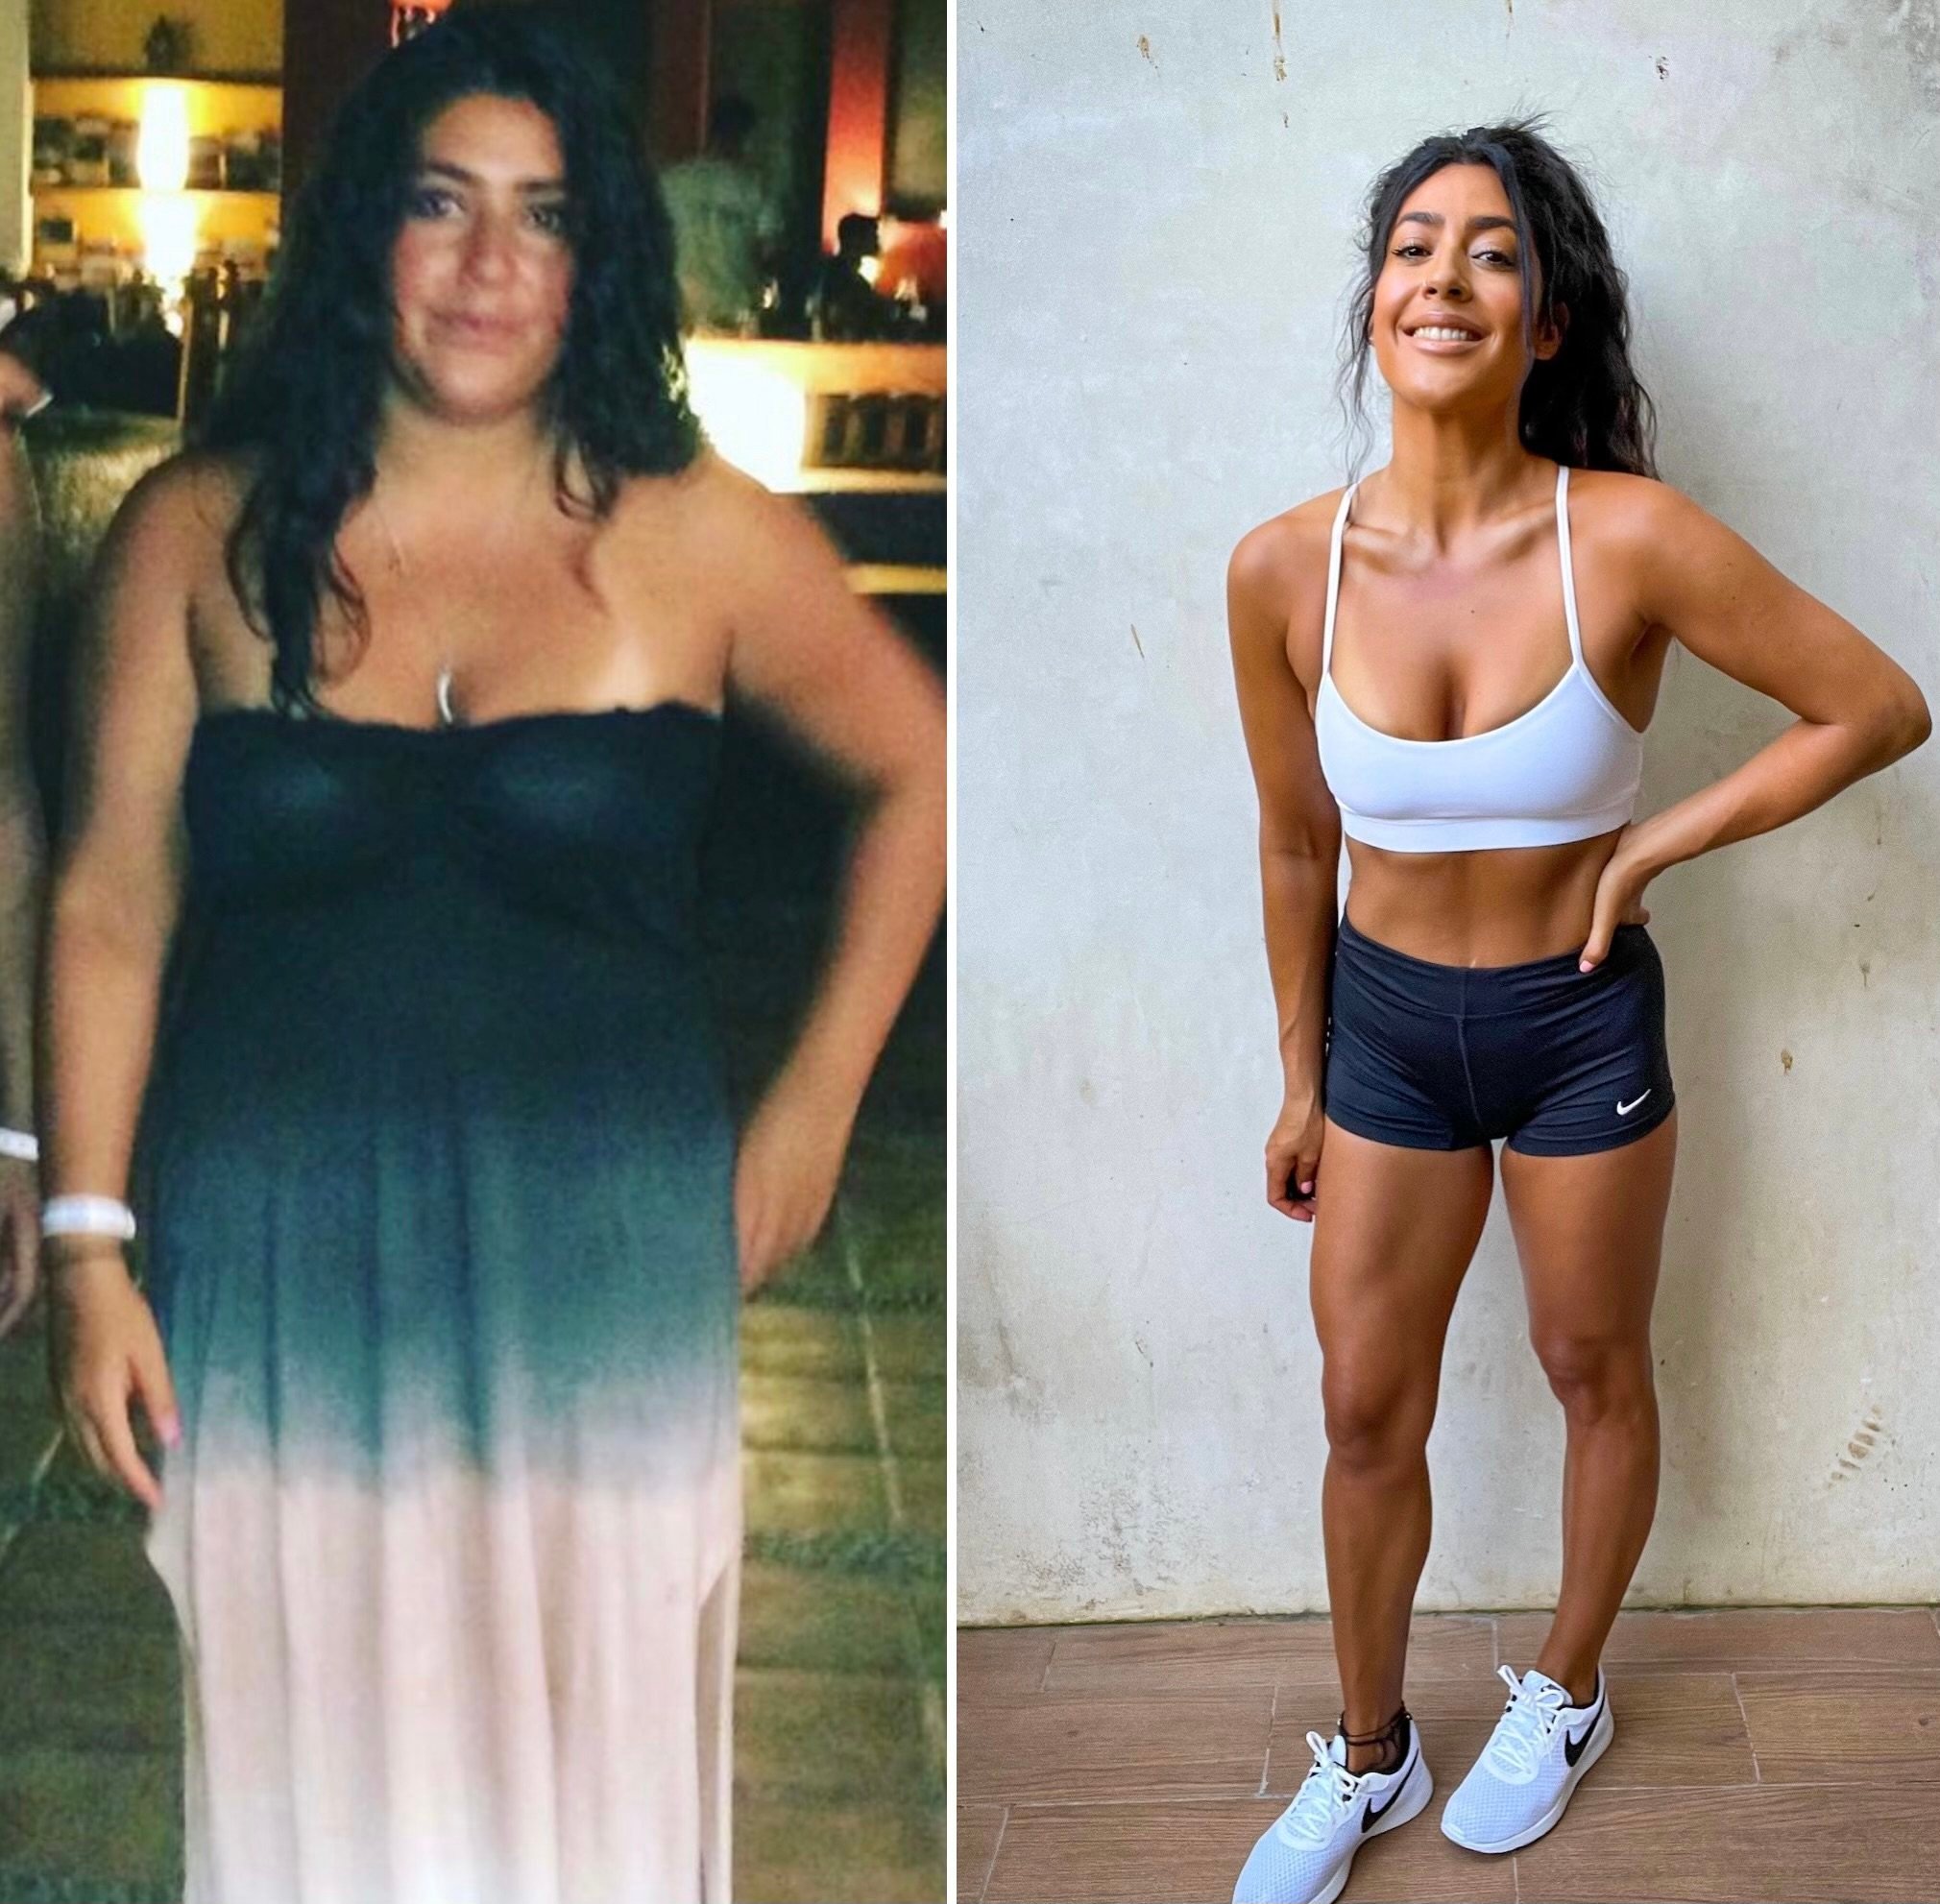 Aged 33, Kiki Nelson weighed 88kg, with 43 per cent body fat (left); within 14 months of adopting a plant-based lifestyle, she lost 32kg. Seven years on, she has kept it off and weighs about 53kg (right).
Photo: Kiki Nelson